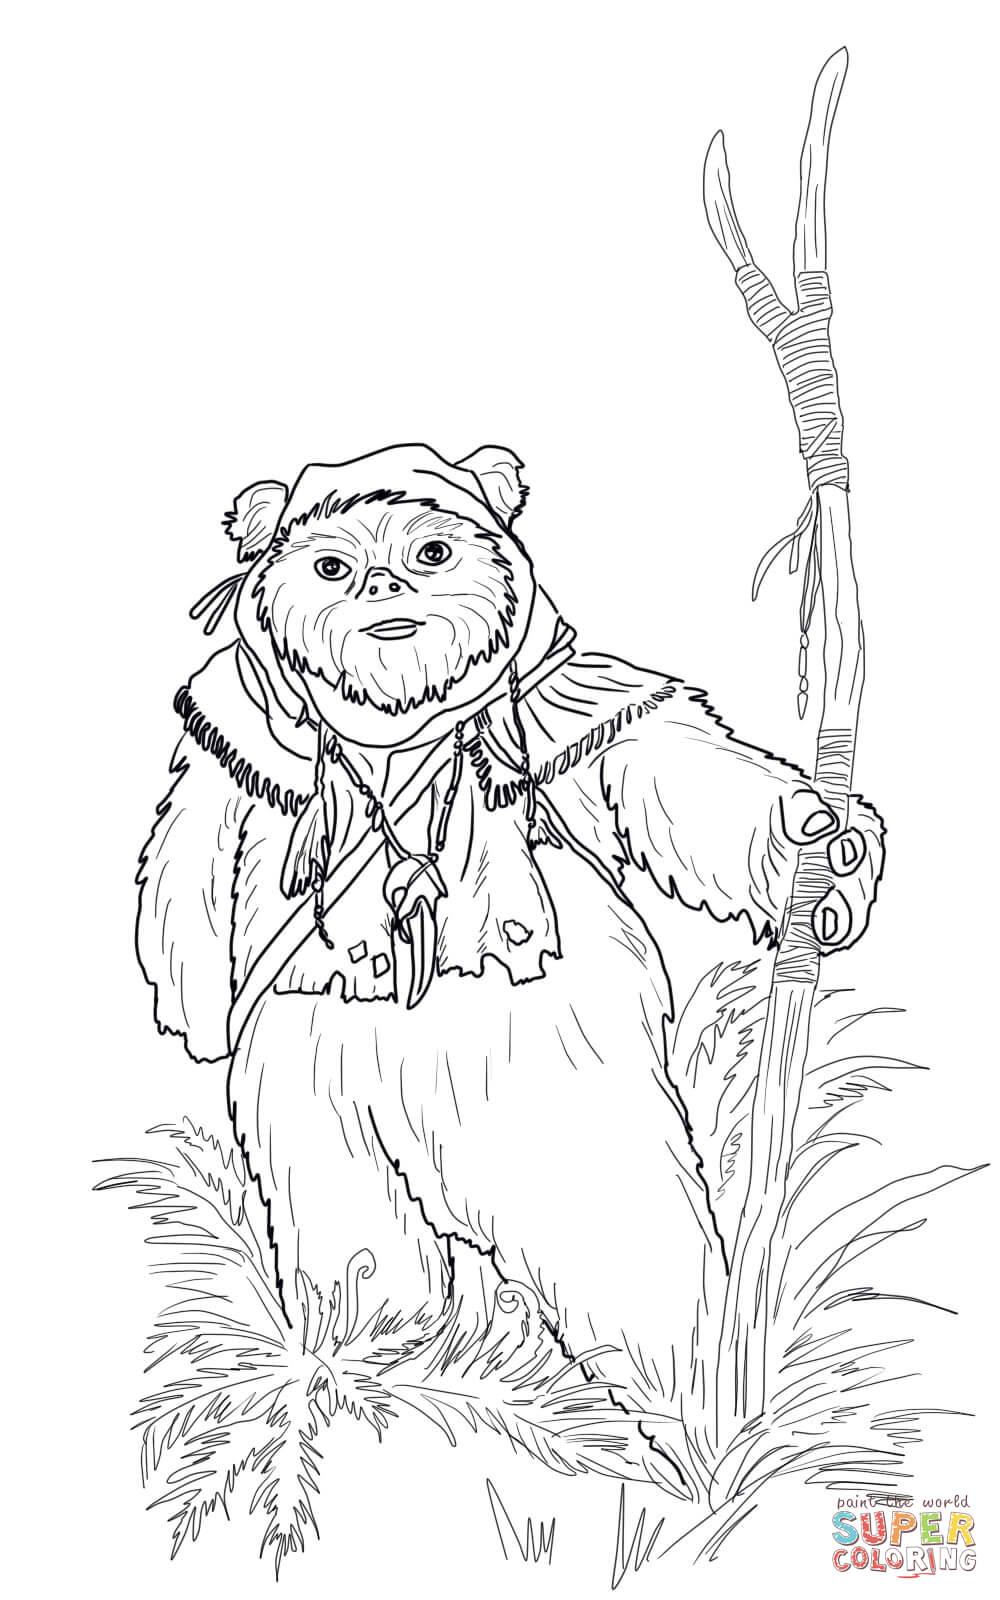 Ewok coloring page | Free Printable Coloring Pages